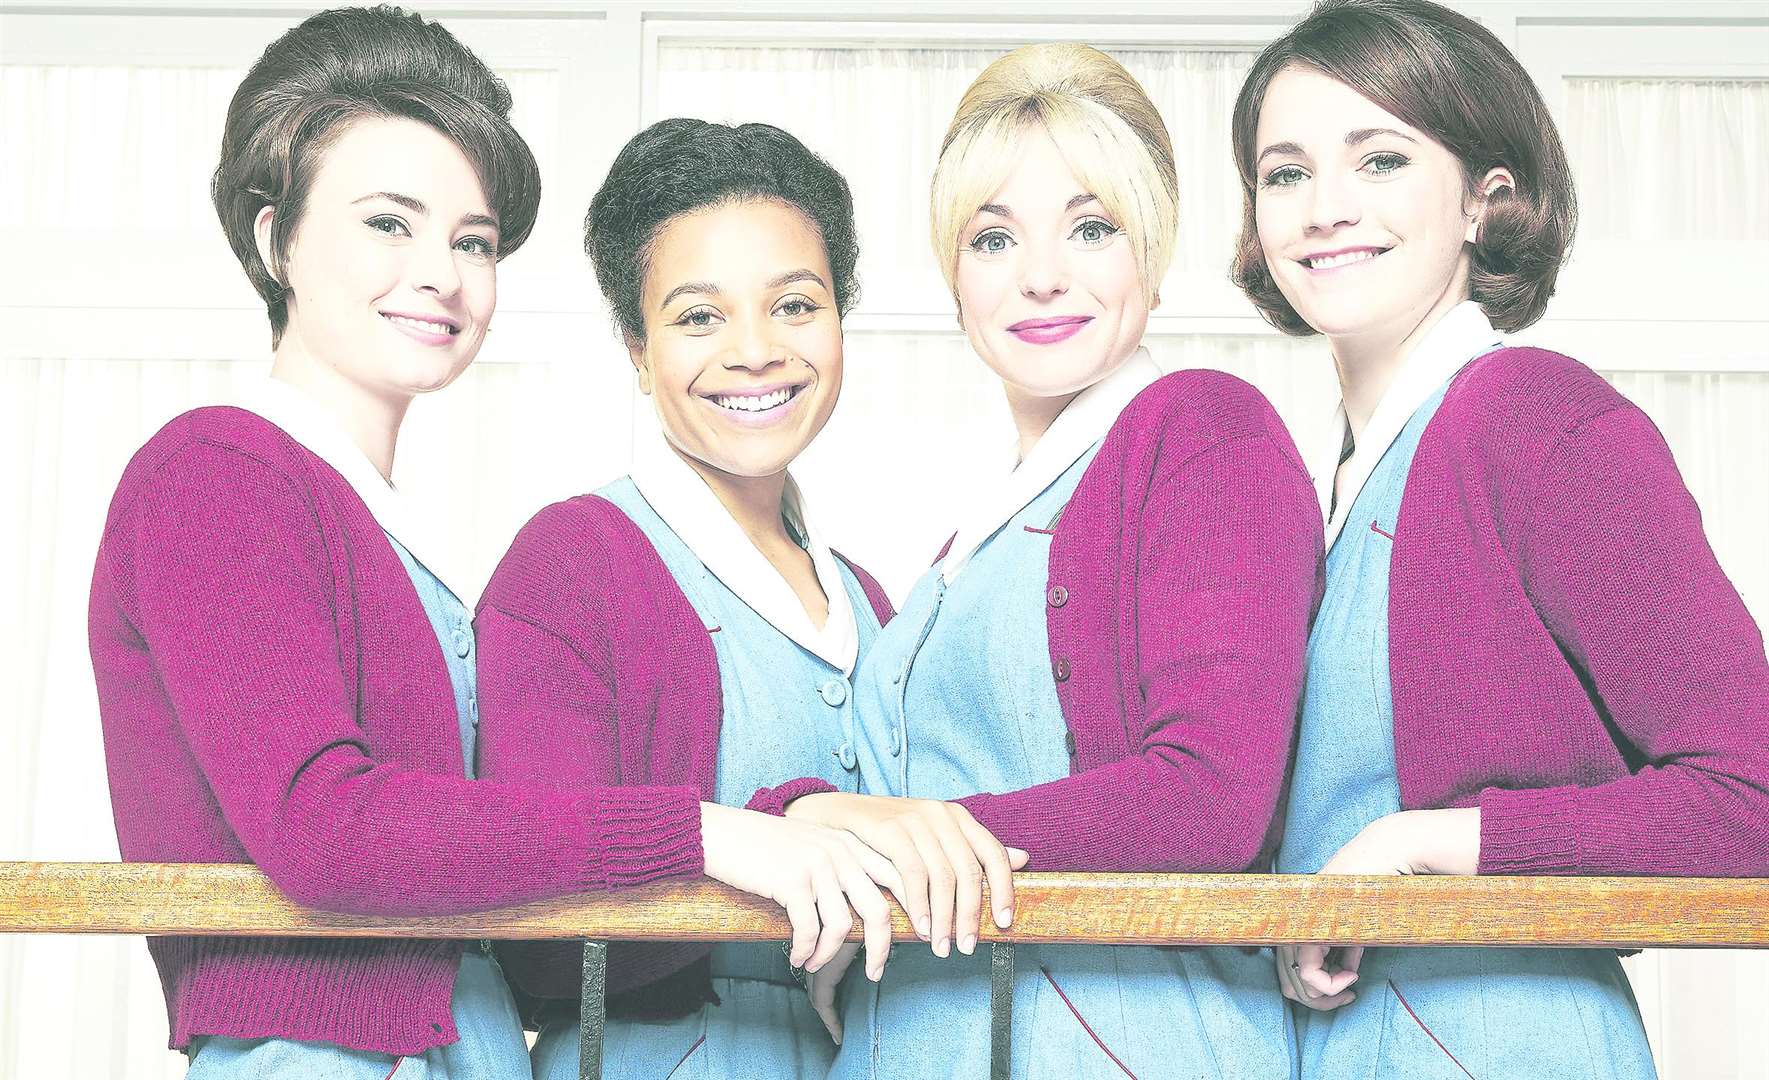 In Call the Midwife staff all carry identical equipment bags. Picture credit: Neal Street productions. Photographer: Nicky Johnston